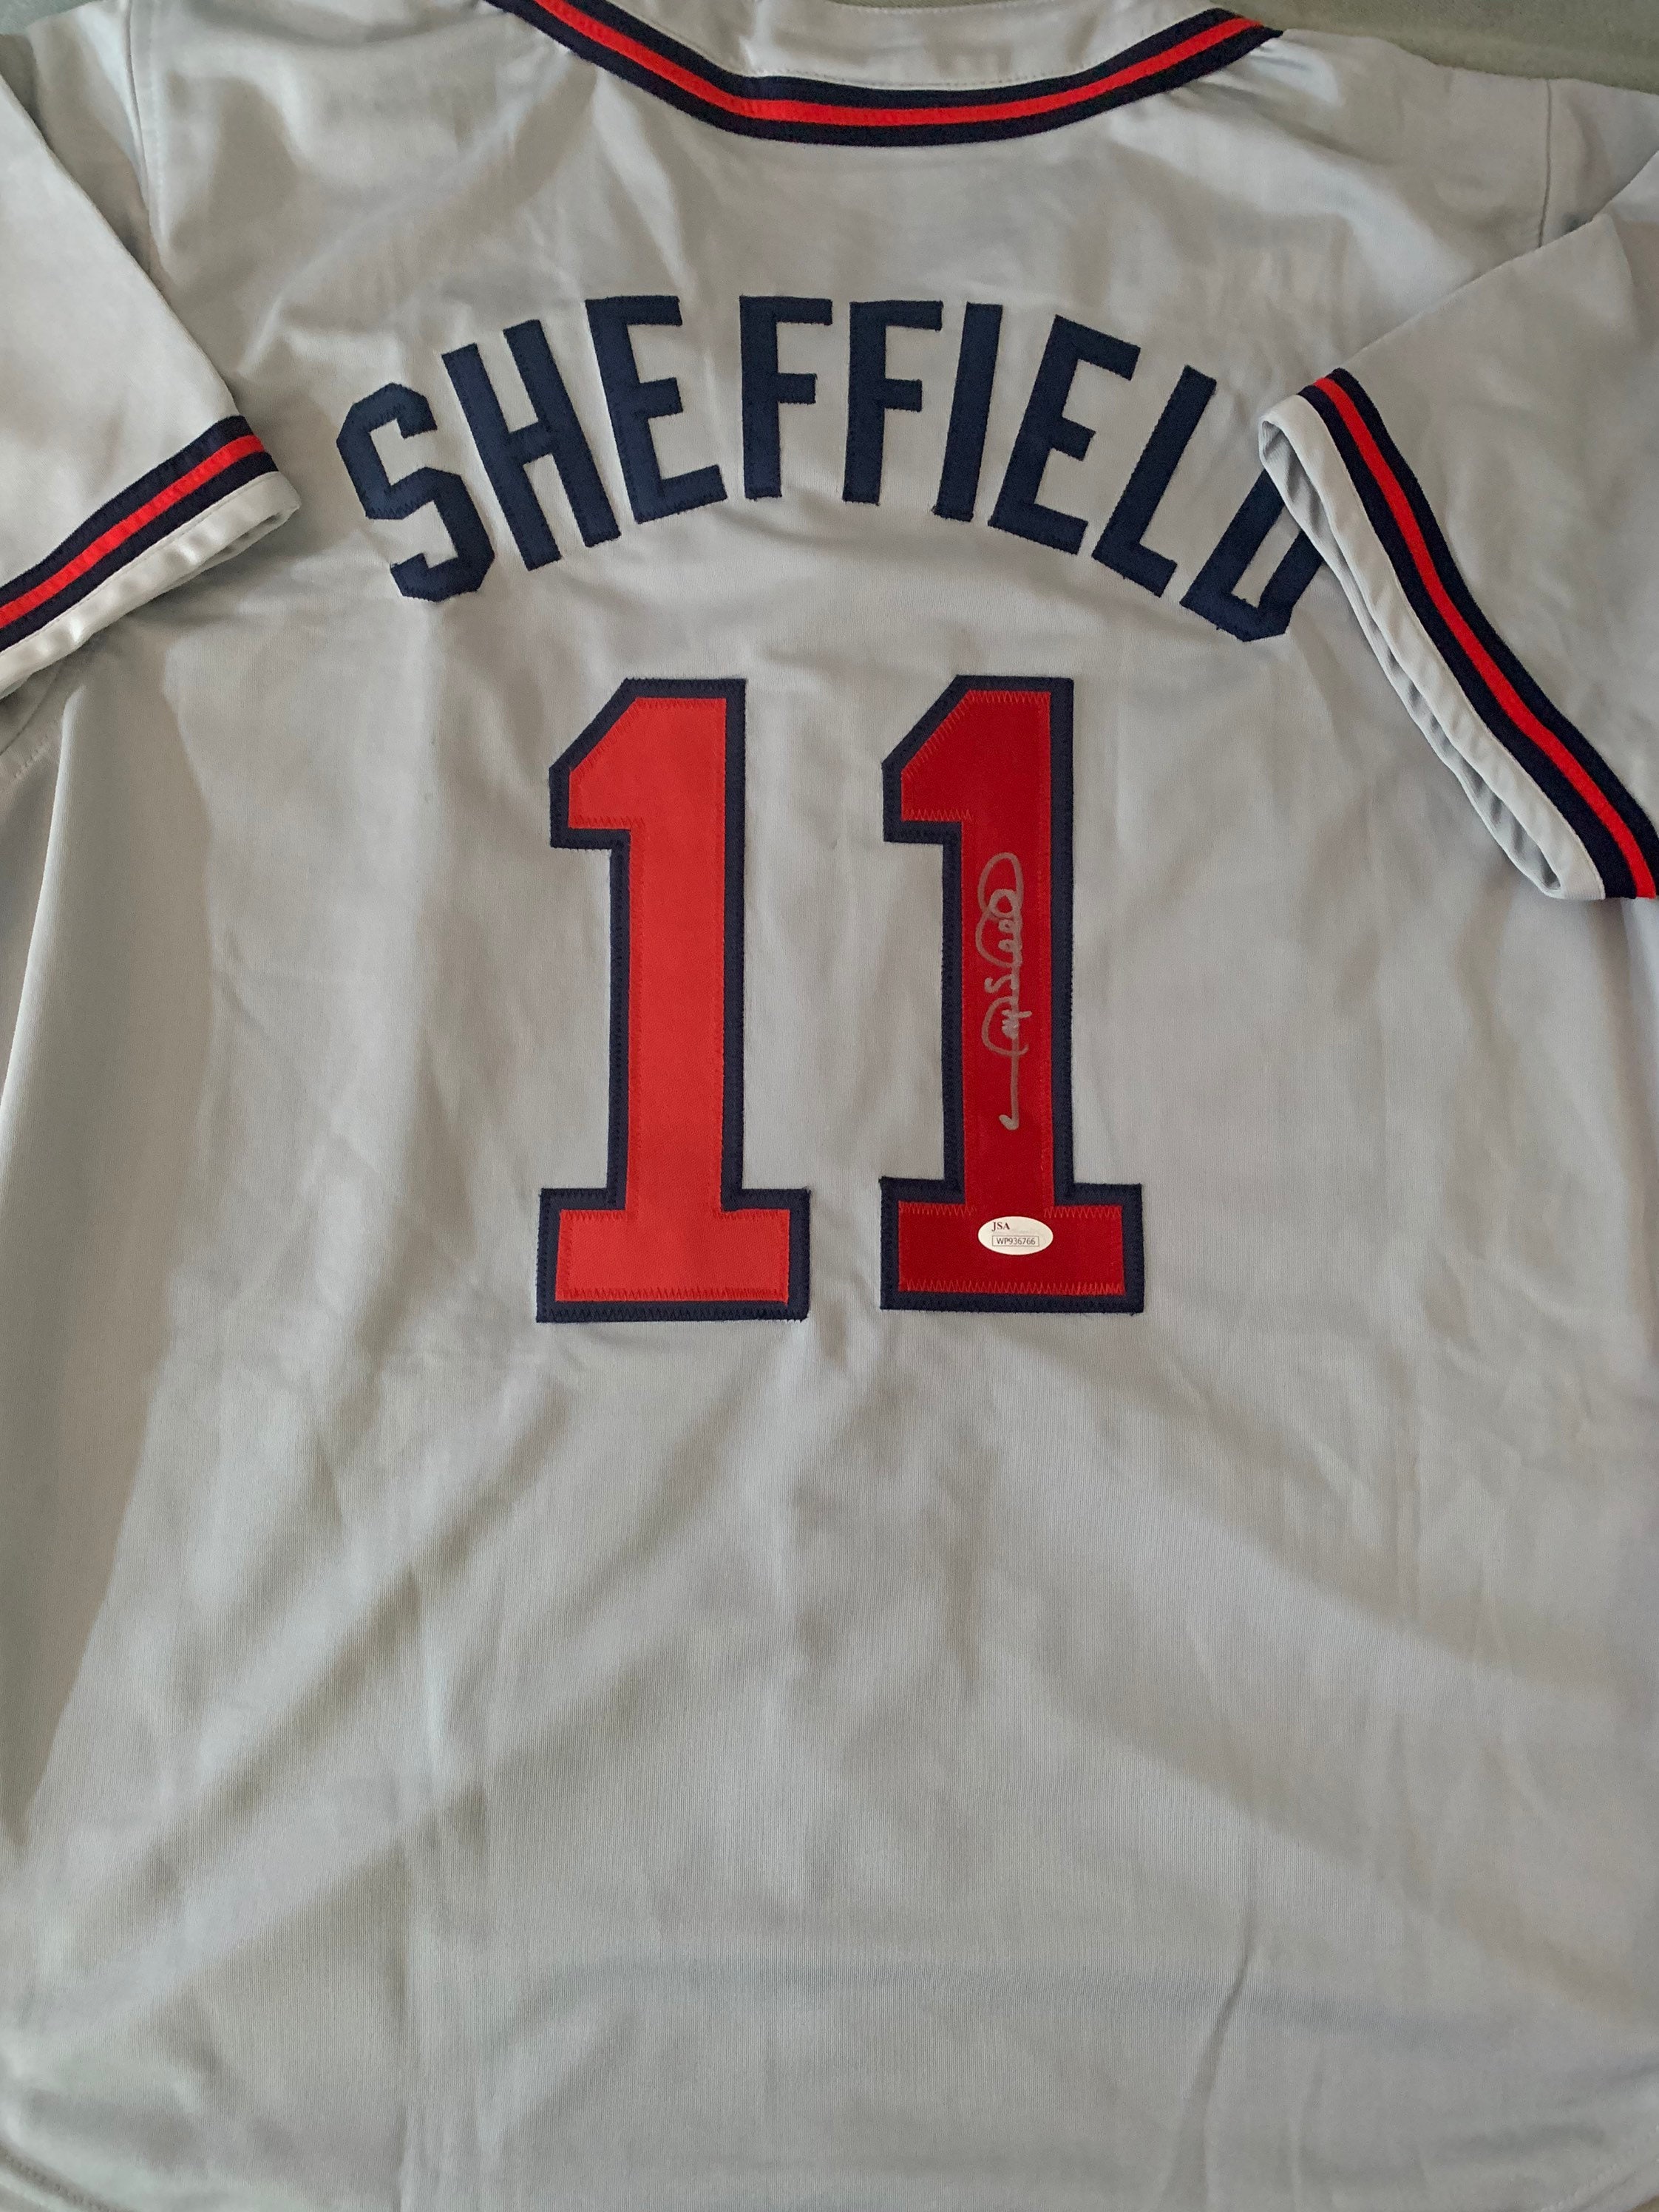 1993 All Star Game Team Gary Sheffield Game Used Jersey JSA With Barry Bonds